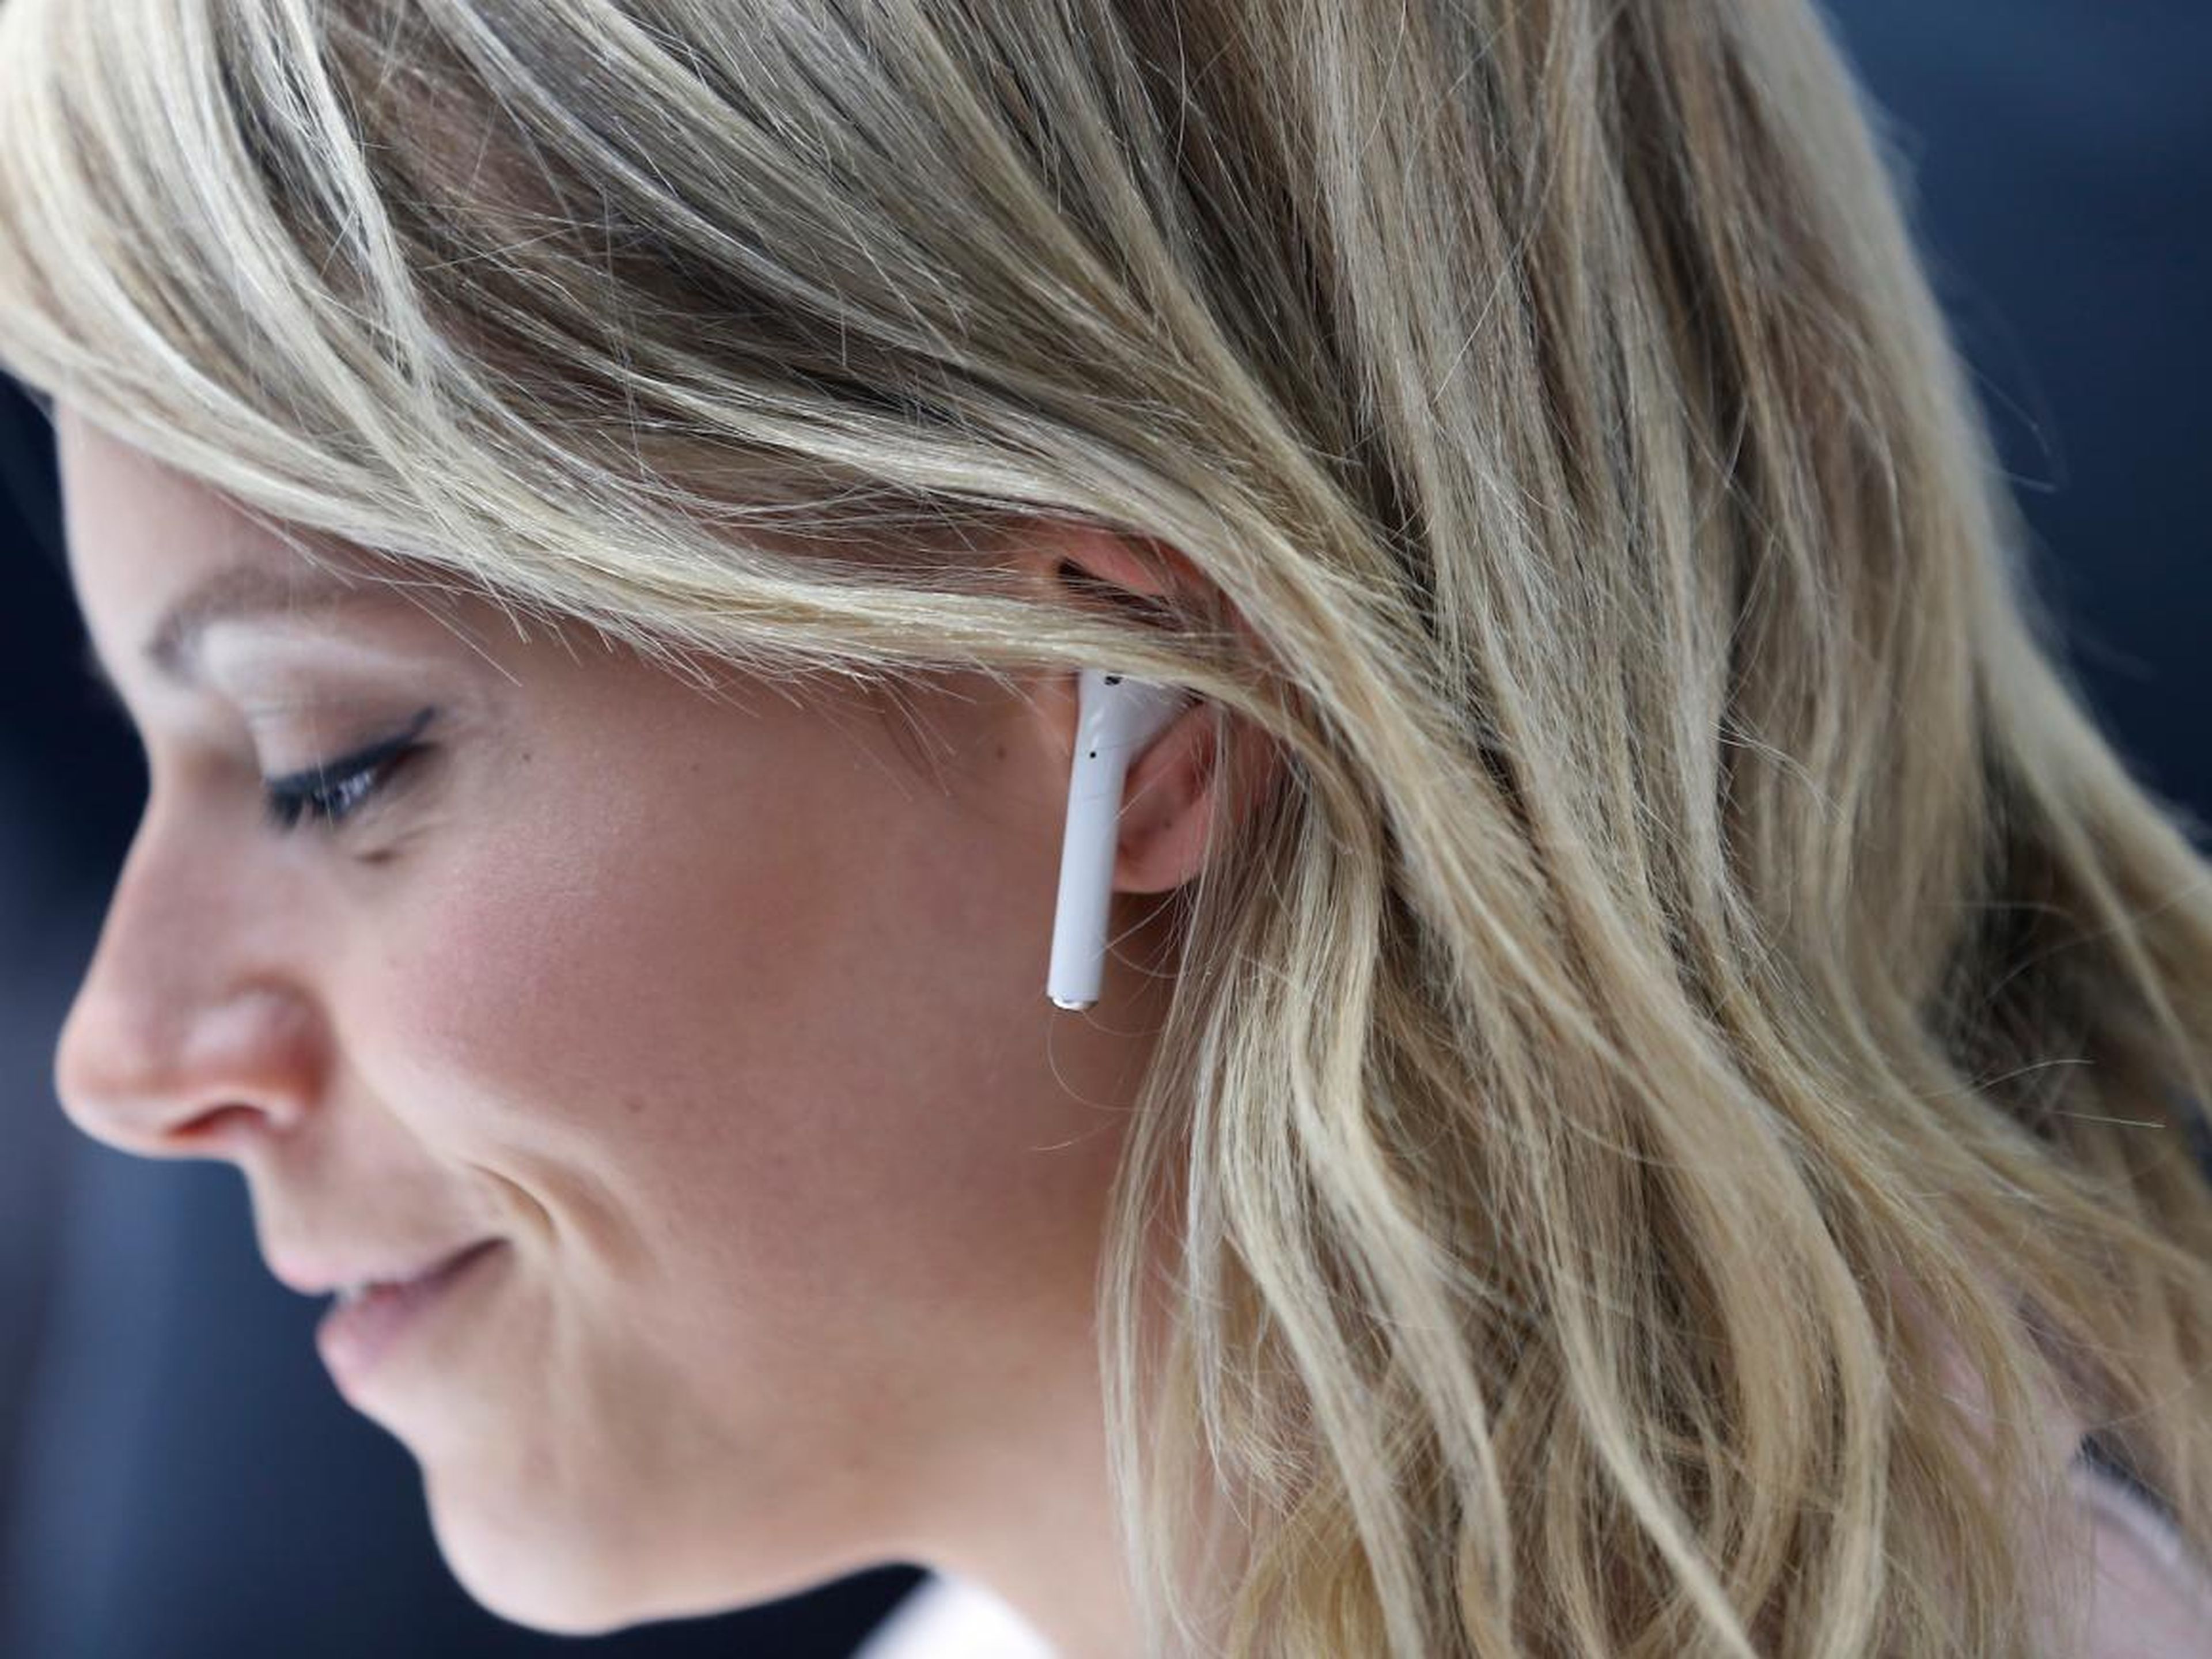 Samsung's Galaxy Buds benefit from newer technology, but the AirPods should still suit most needs.